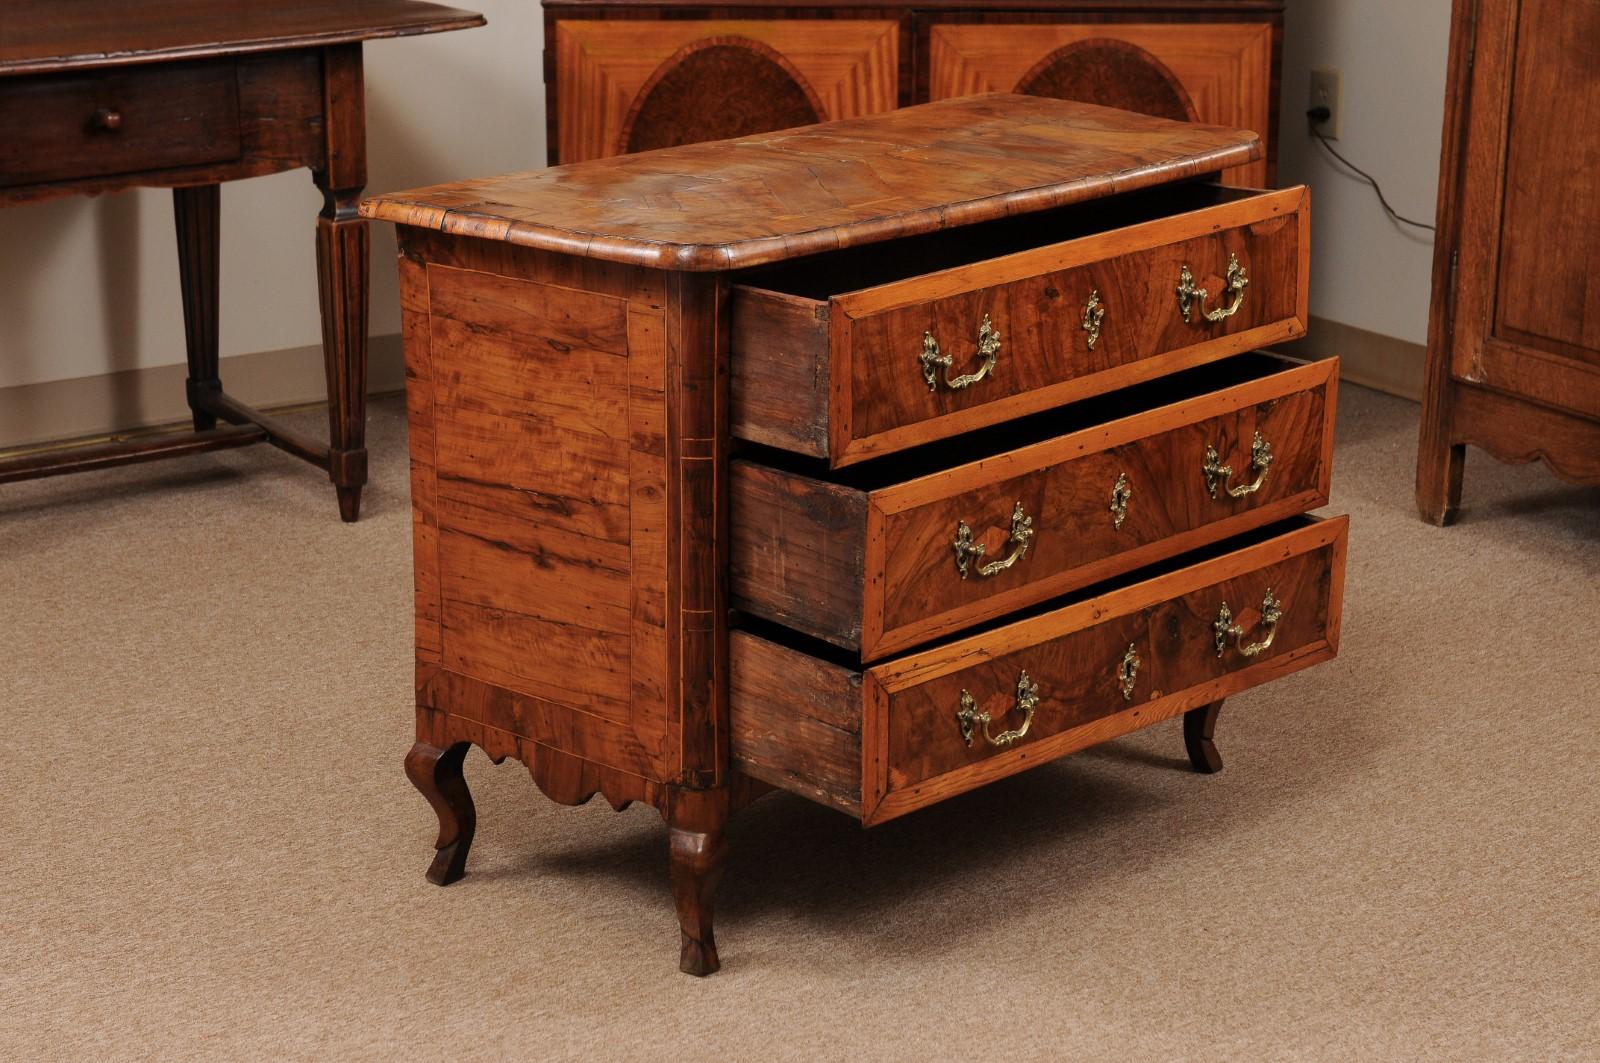 18th Century Italian 3-Drawer Commode in Olivewood with Cabriole Legs For Sale 2